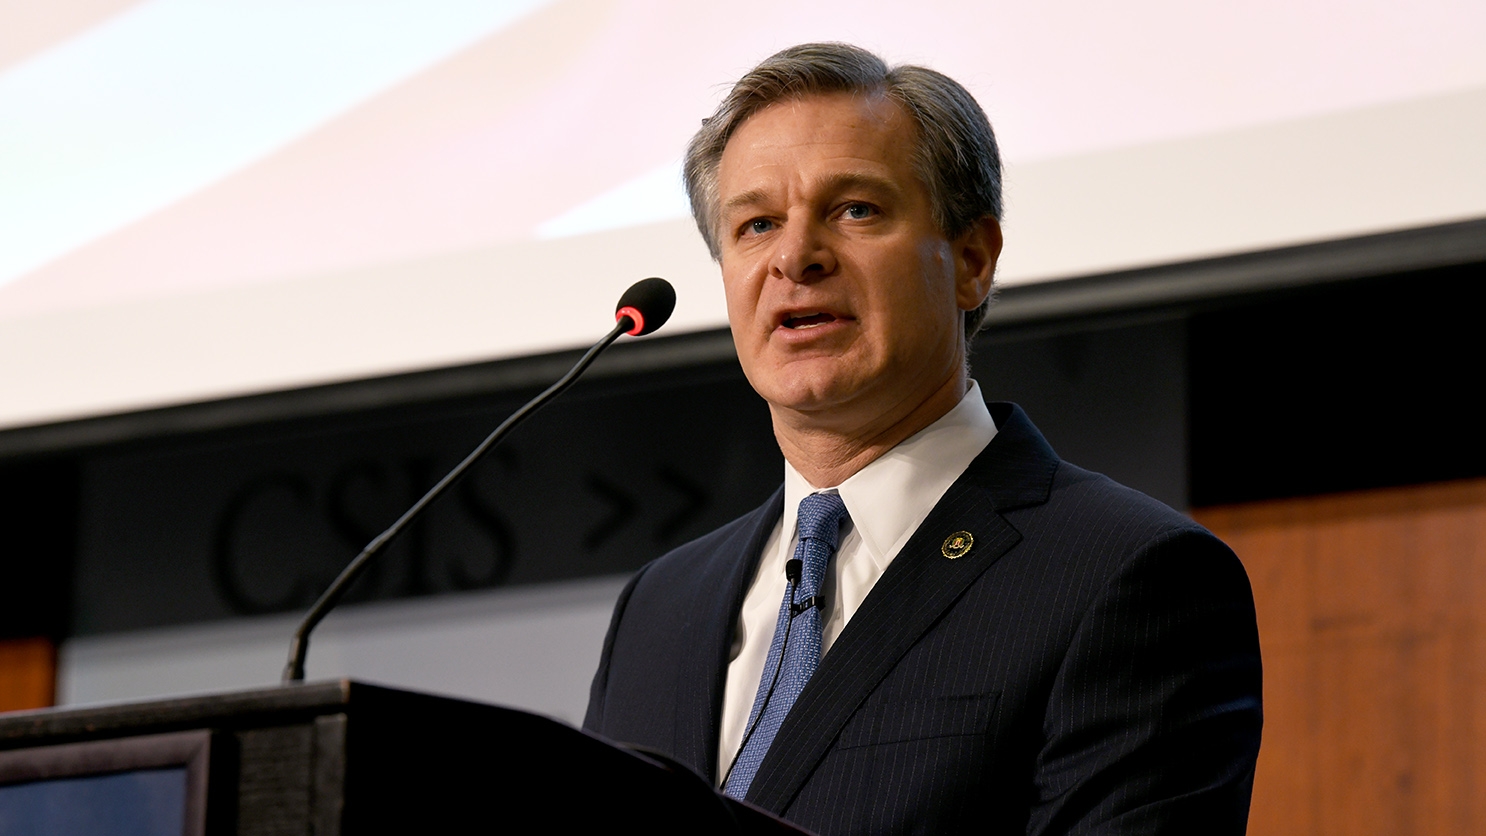 FBI Director Christopher Wray provides remarks at the China Initiative Conference.